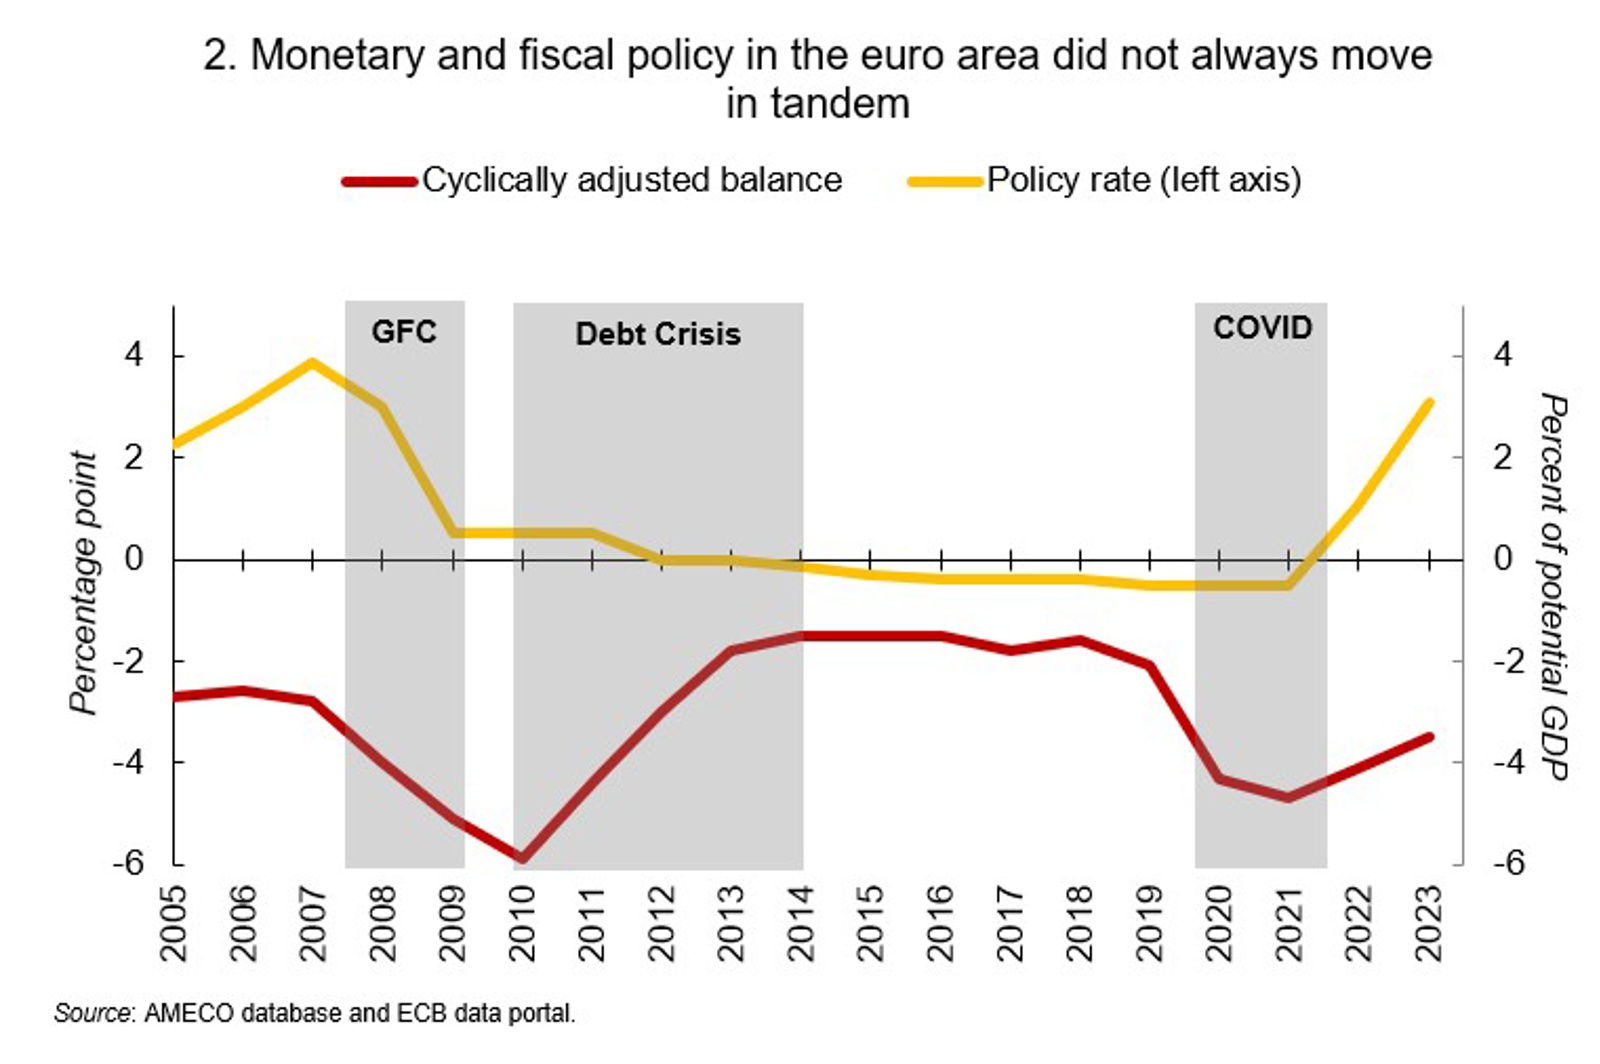 Monetary and fiscal policy in the euro area did not always move in tandem